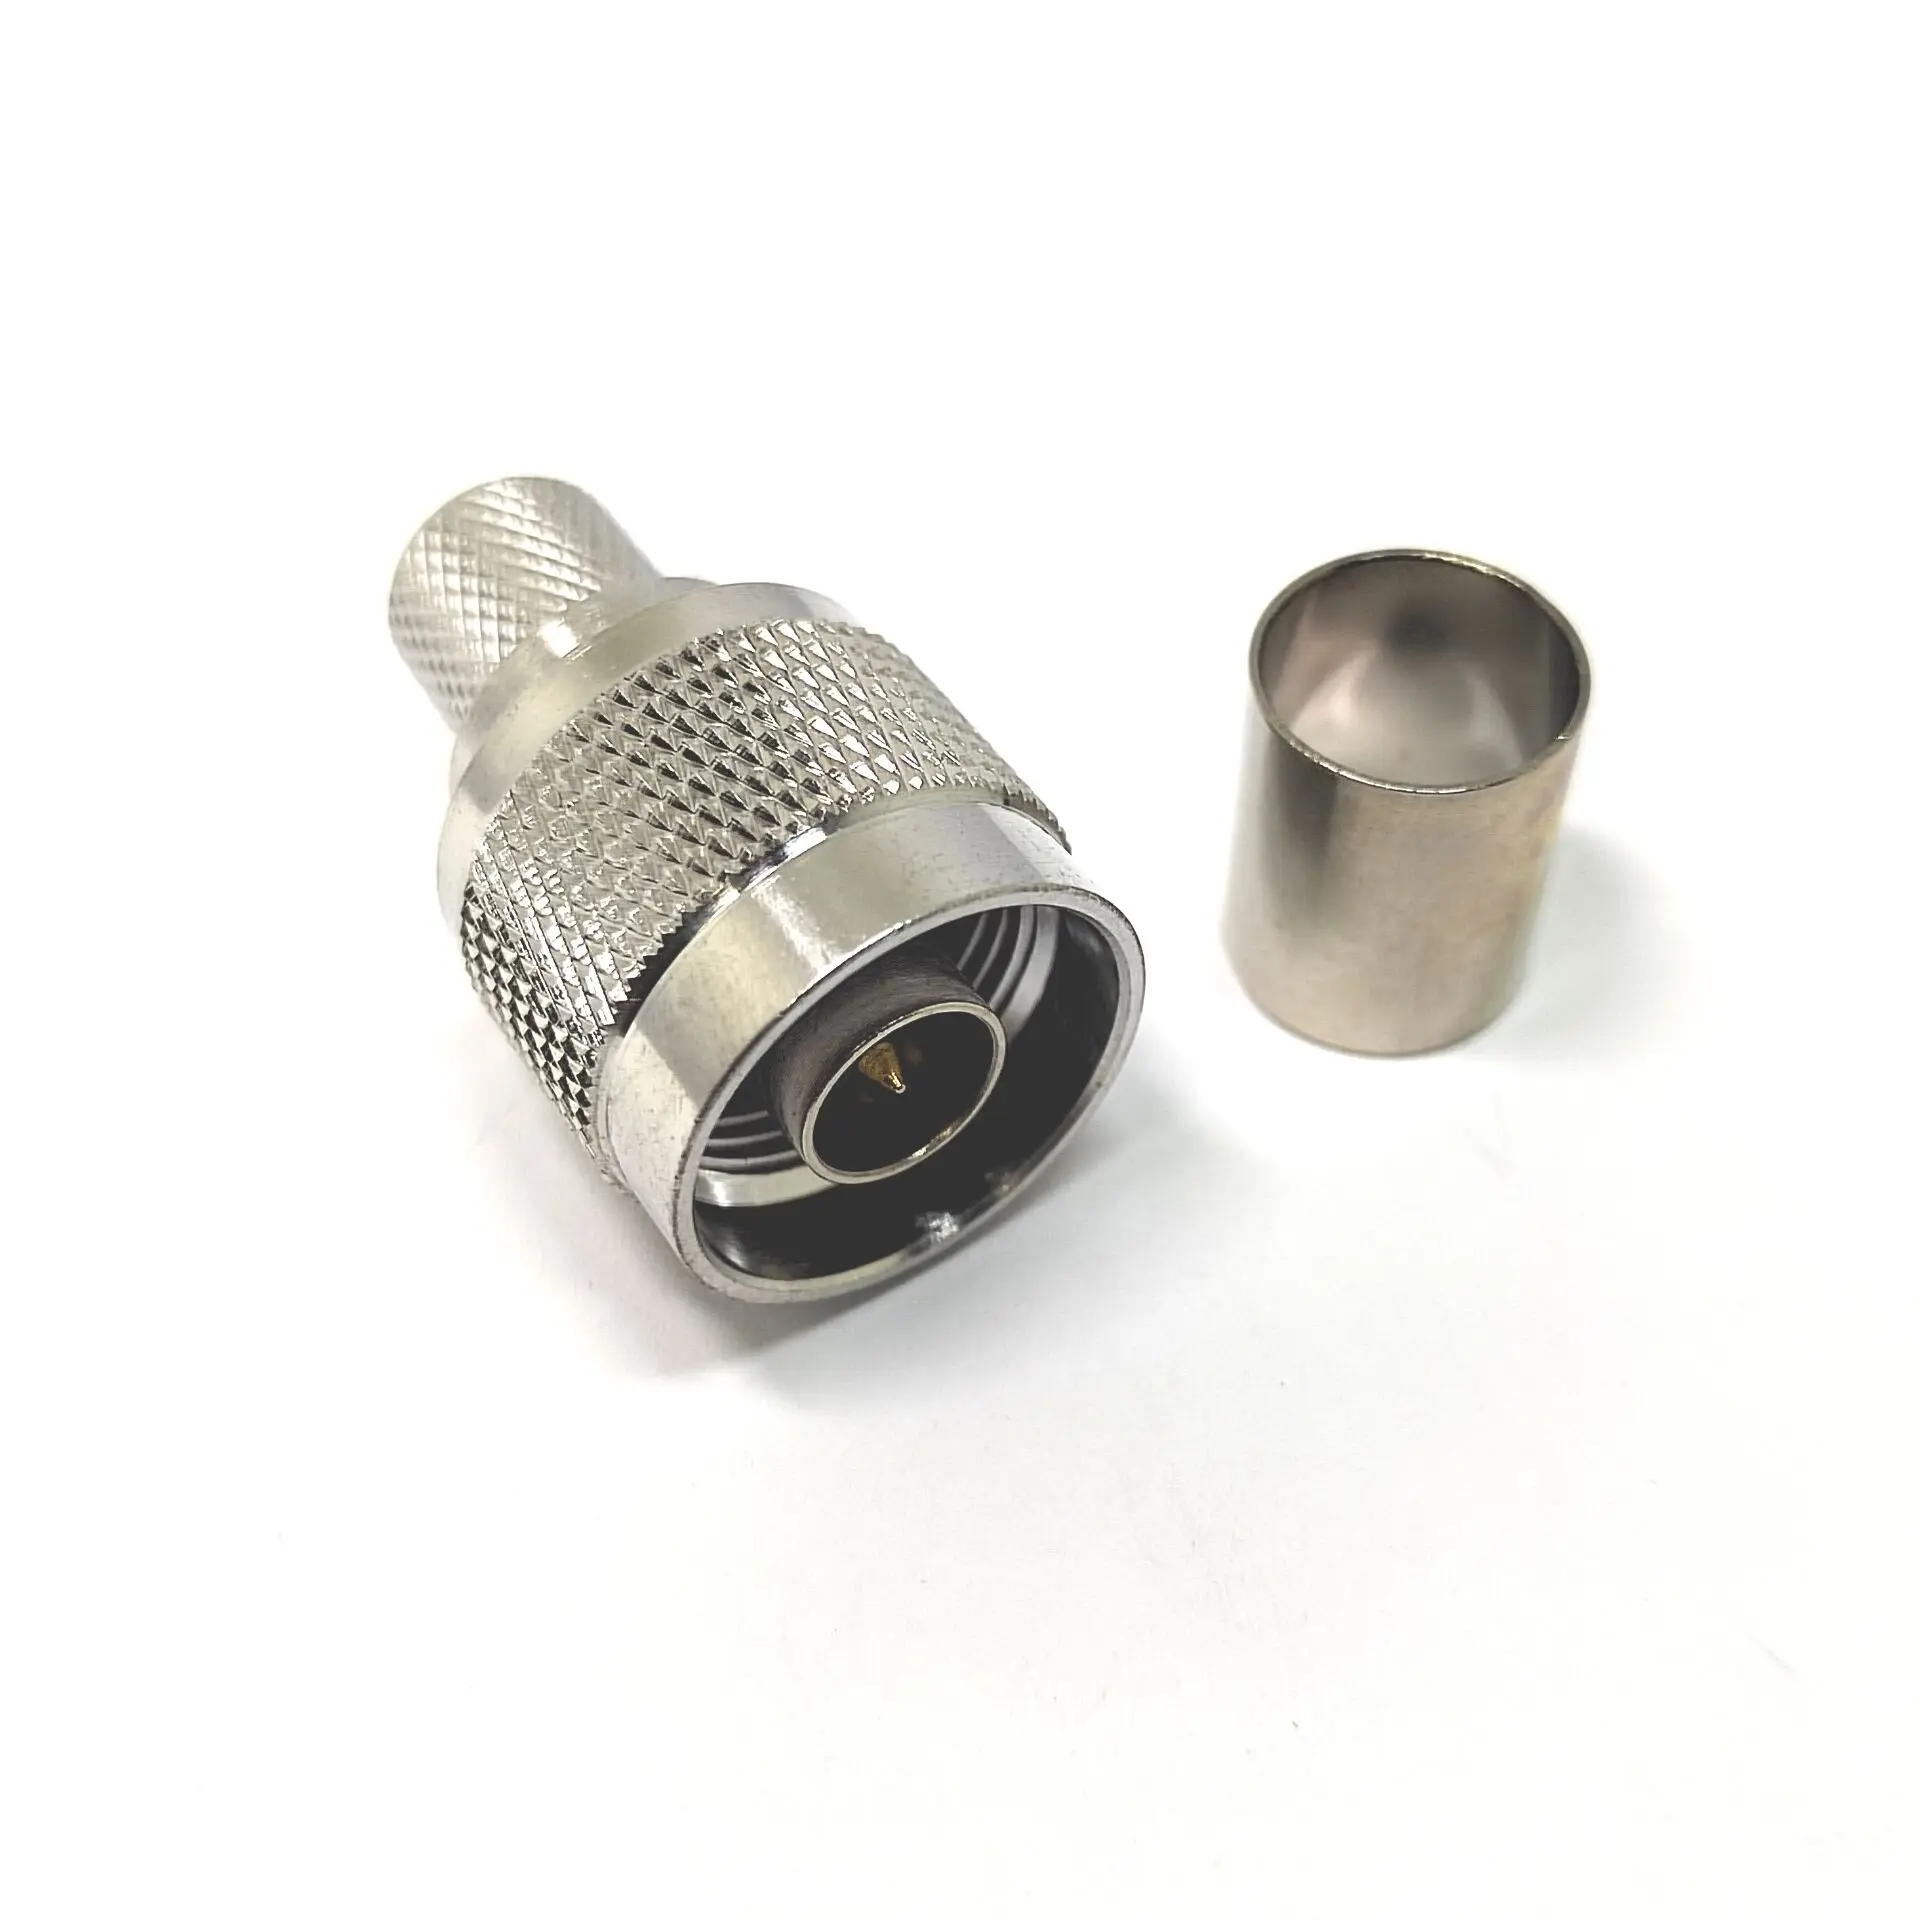 High Performance N type rf Connector Male/plug crimp solderless for rg8/lmr400 cable manufacture